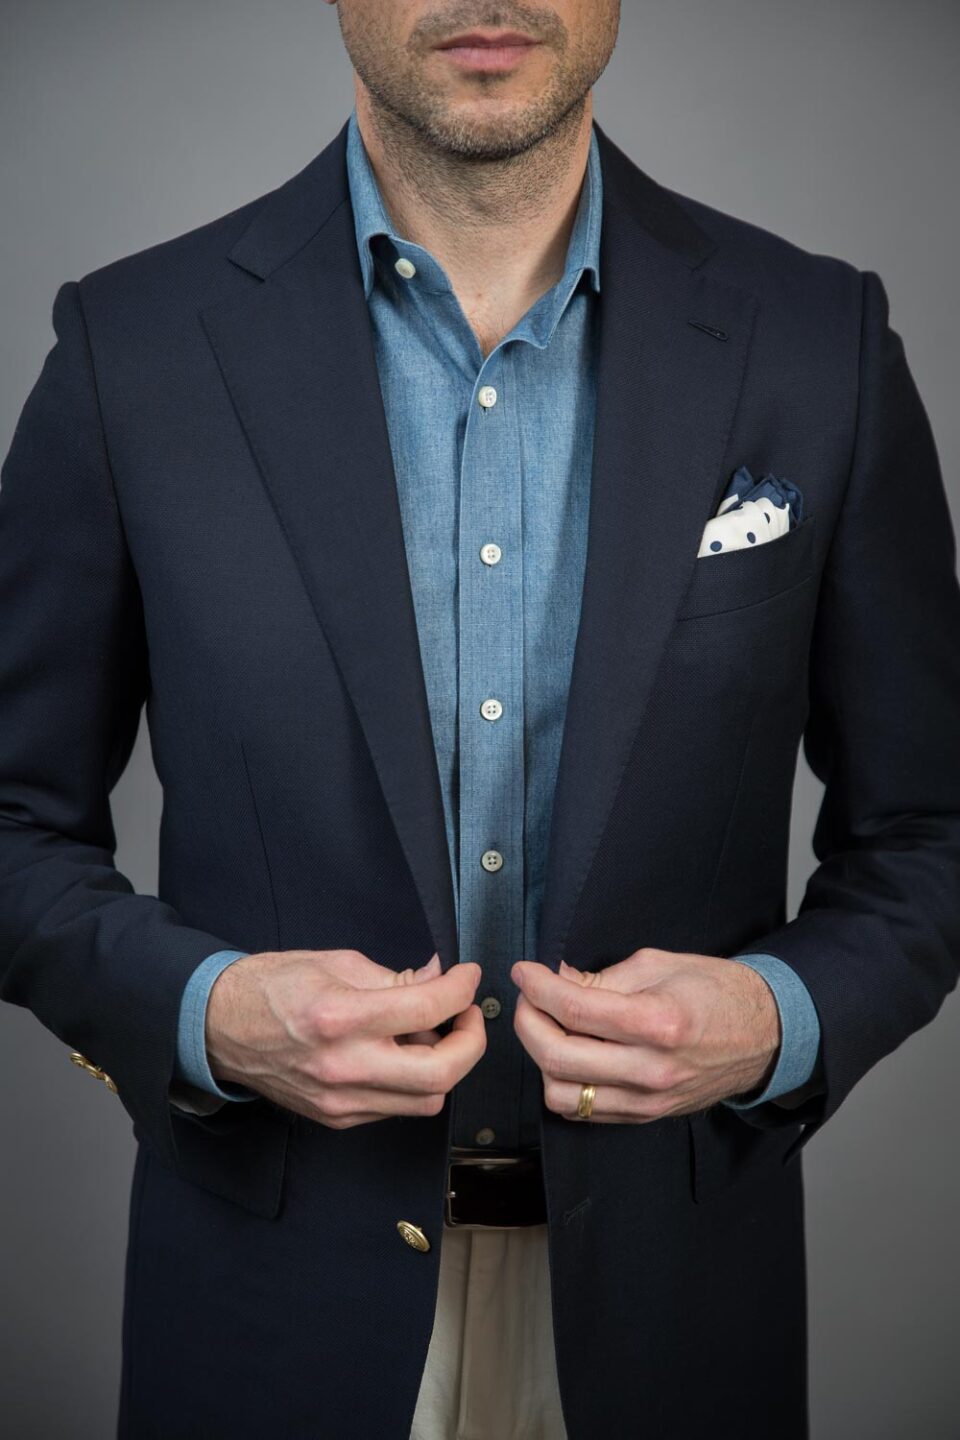 The Navy Blazer With Brass Buttons